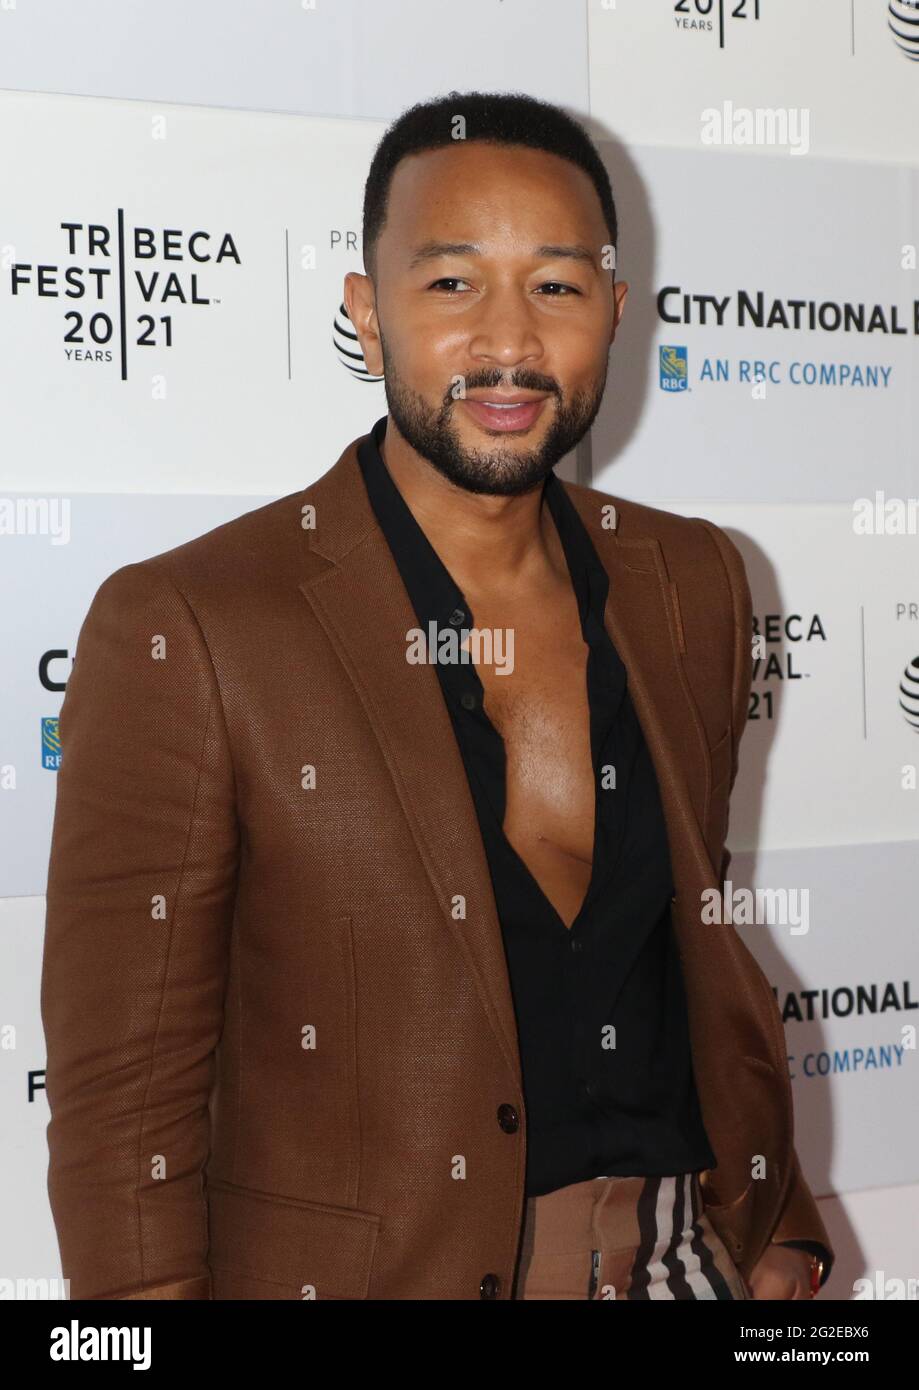 New York, New York, USA. 10th June, 2021. John Legend at the 2021 Tribeca Festival Premiere of Legend Of The Underground at Brookfield Place on June 10, 2021 in New York City. Credit: Rw/Media Punch/Alamy Live News Stock Photo